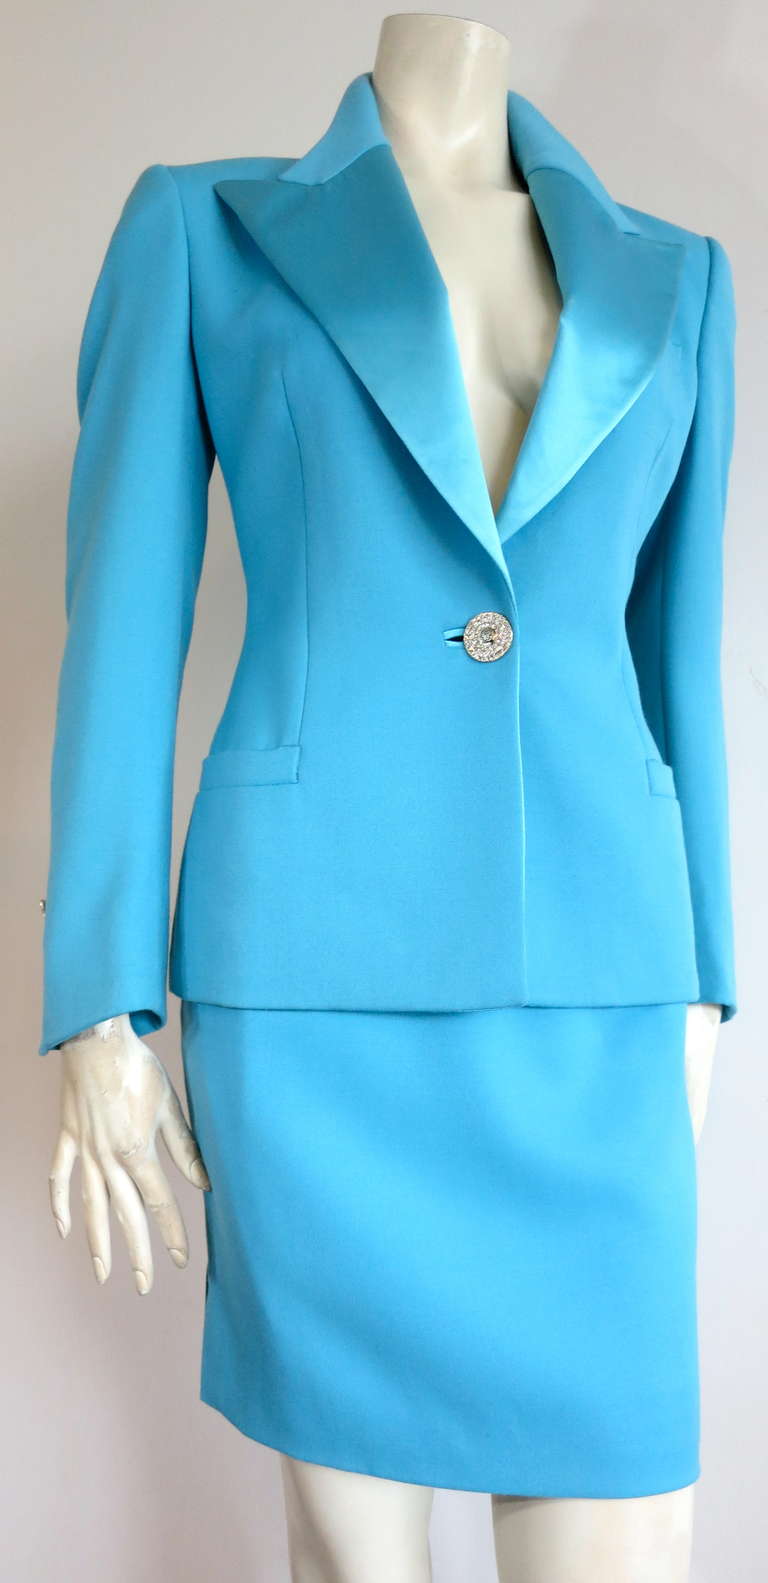 Early 1990's GIANNI VERSACE COUTURE Turquoise skirt suit.

This stunning skirt suit was designed by Gianni Versace in Italy during the early 1990's.

The jacket features silk satin, peak lapels with crystal embellished, Medusa head engraved